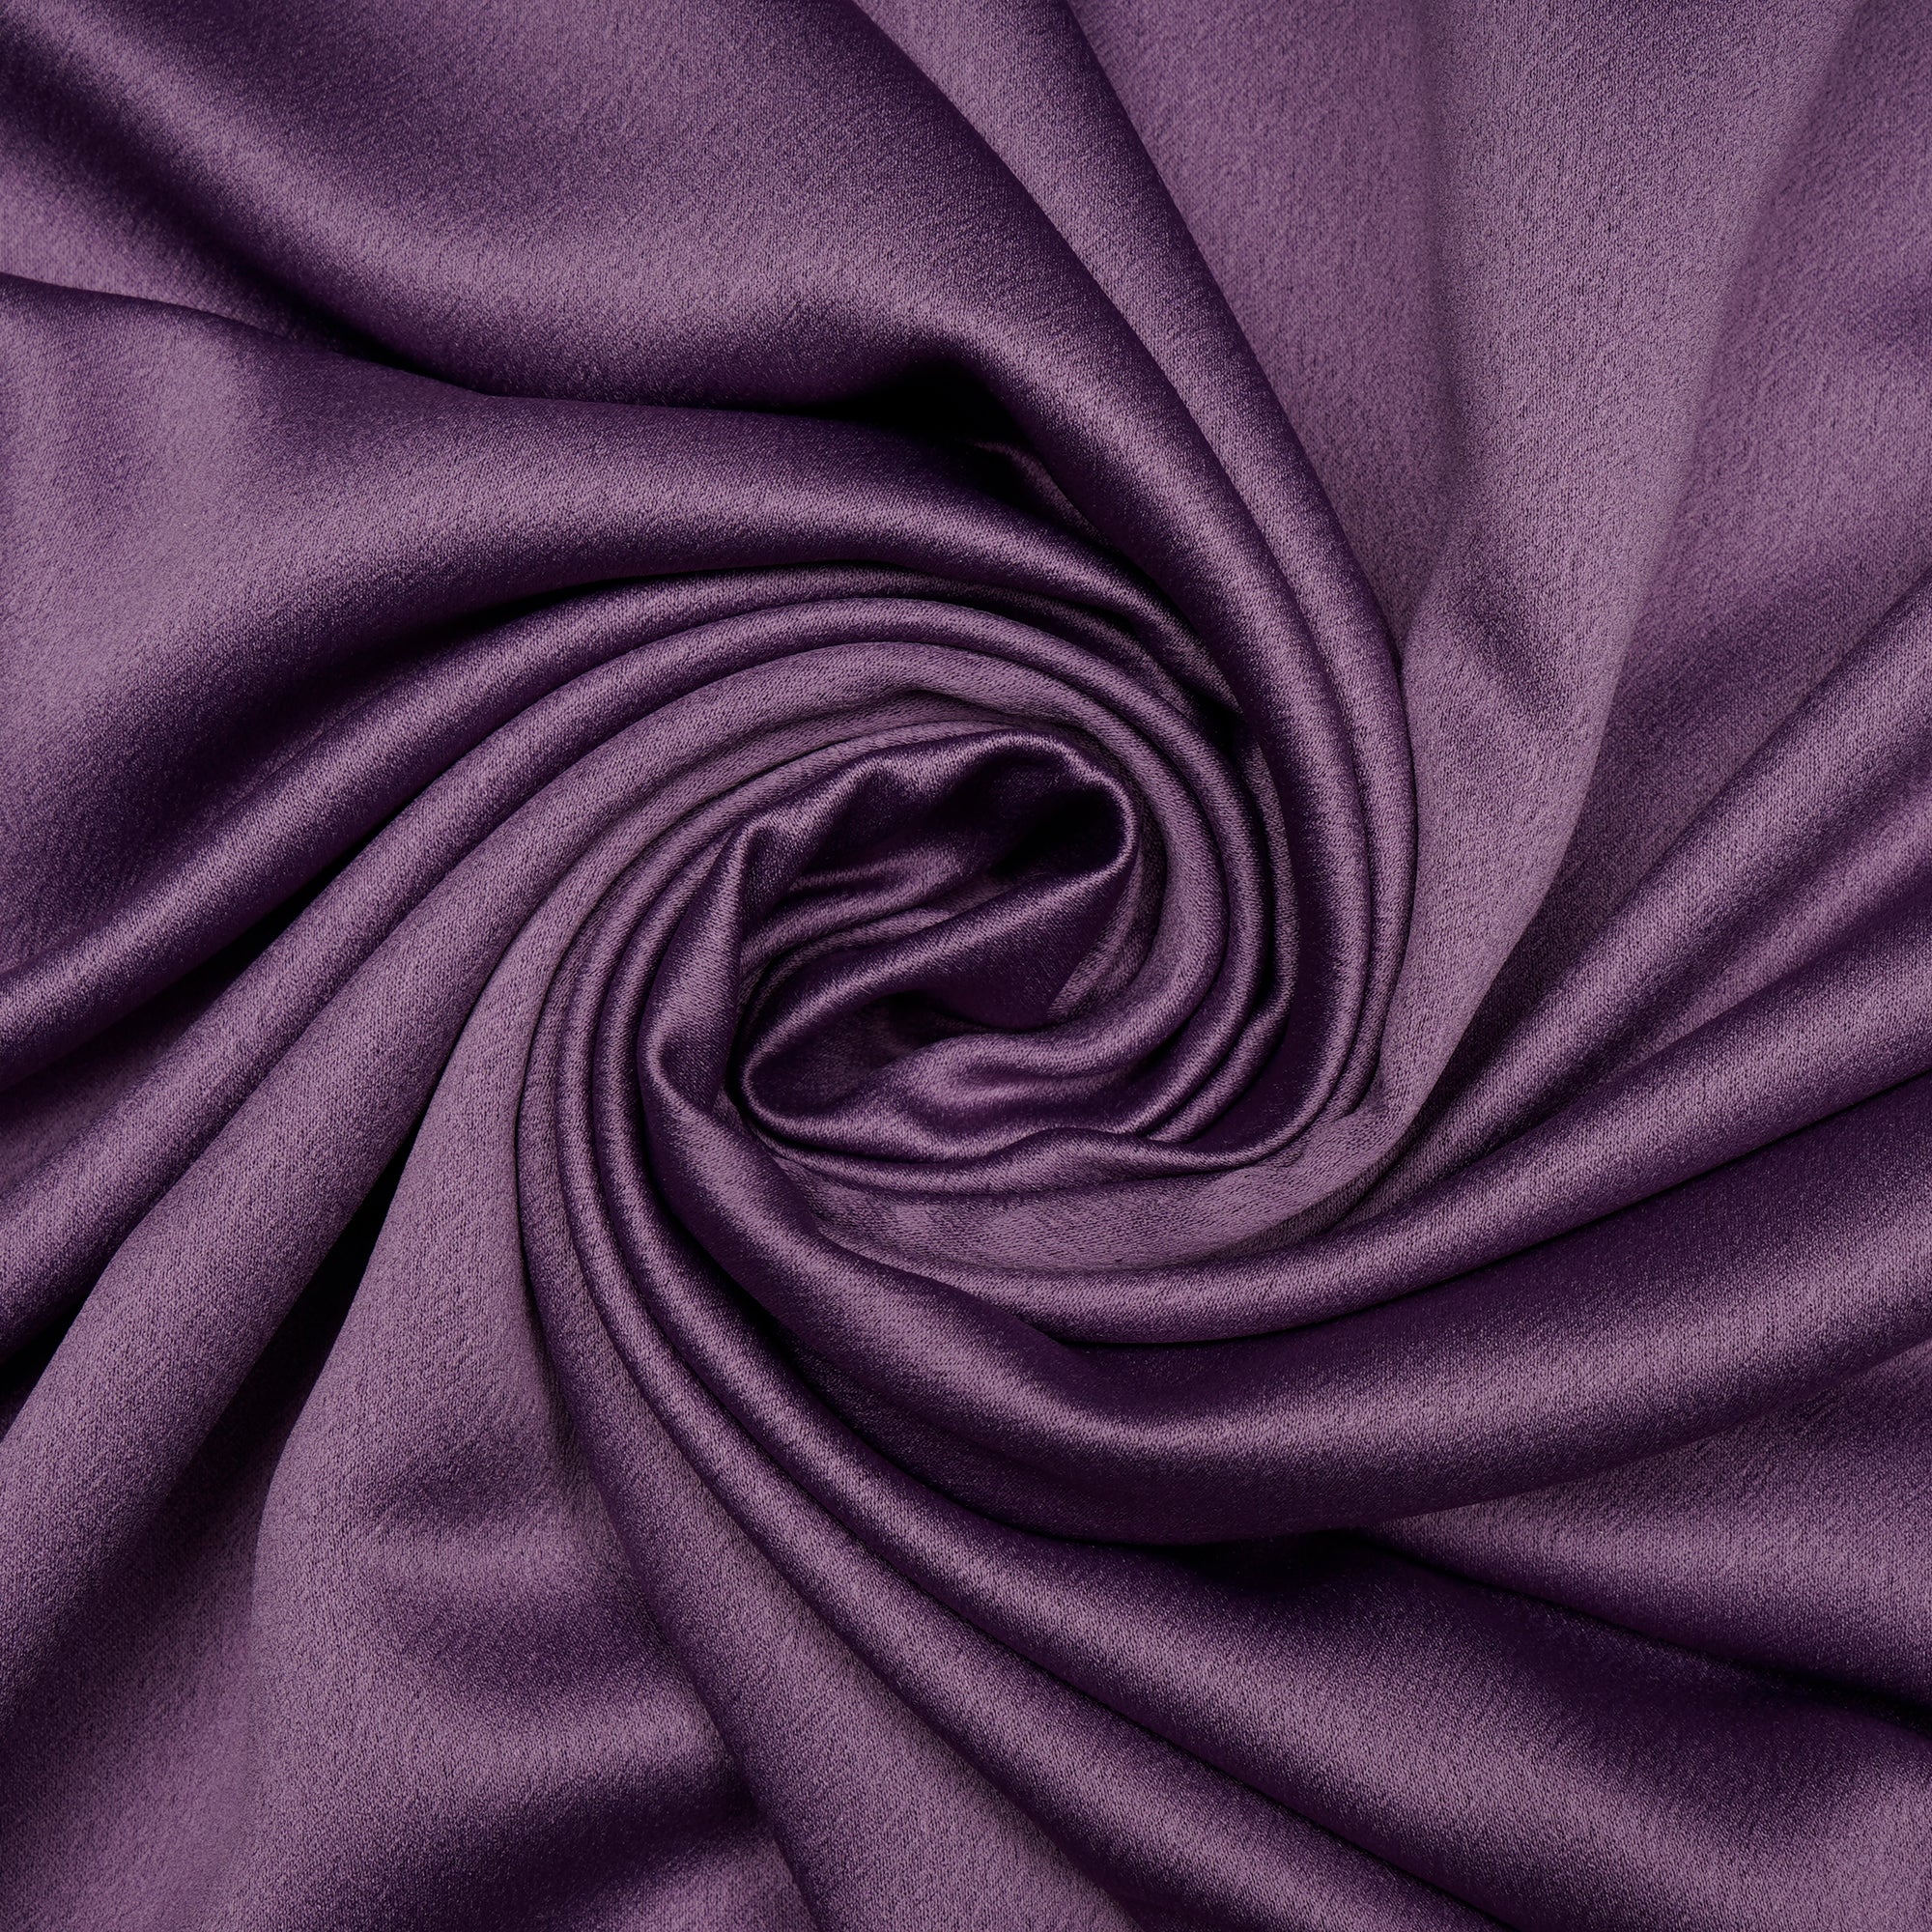 Concord Grape Solid Dyed Imported Versace Crepe Fabric (60" Width)